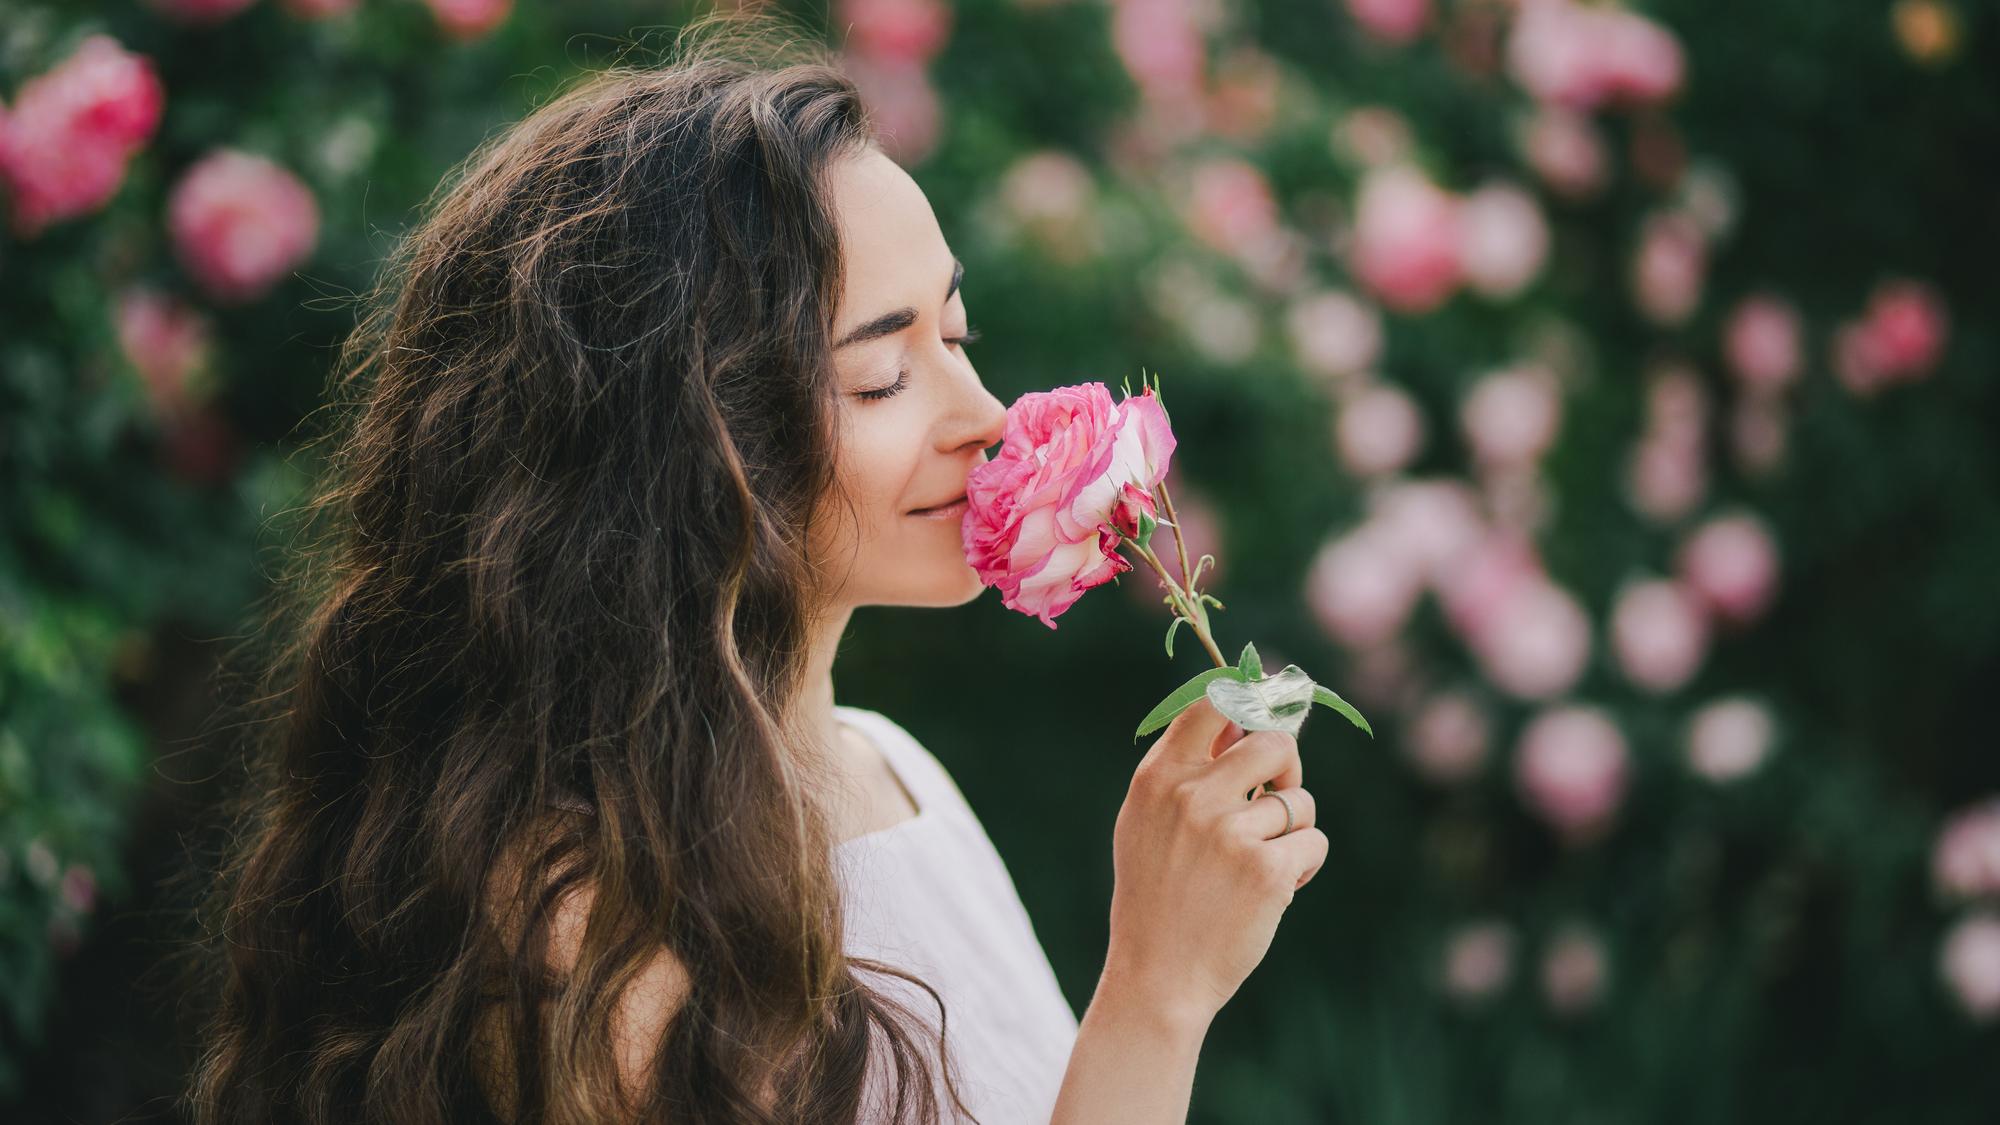 Beautiful young woman with long curly hair and perfect skin wearing pink linen dress posing near blooming roses in a garden.